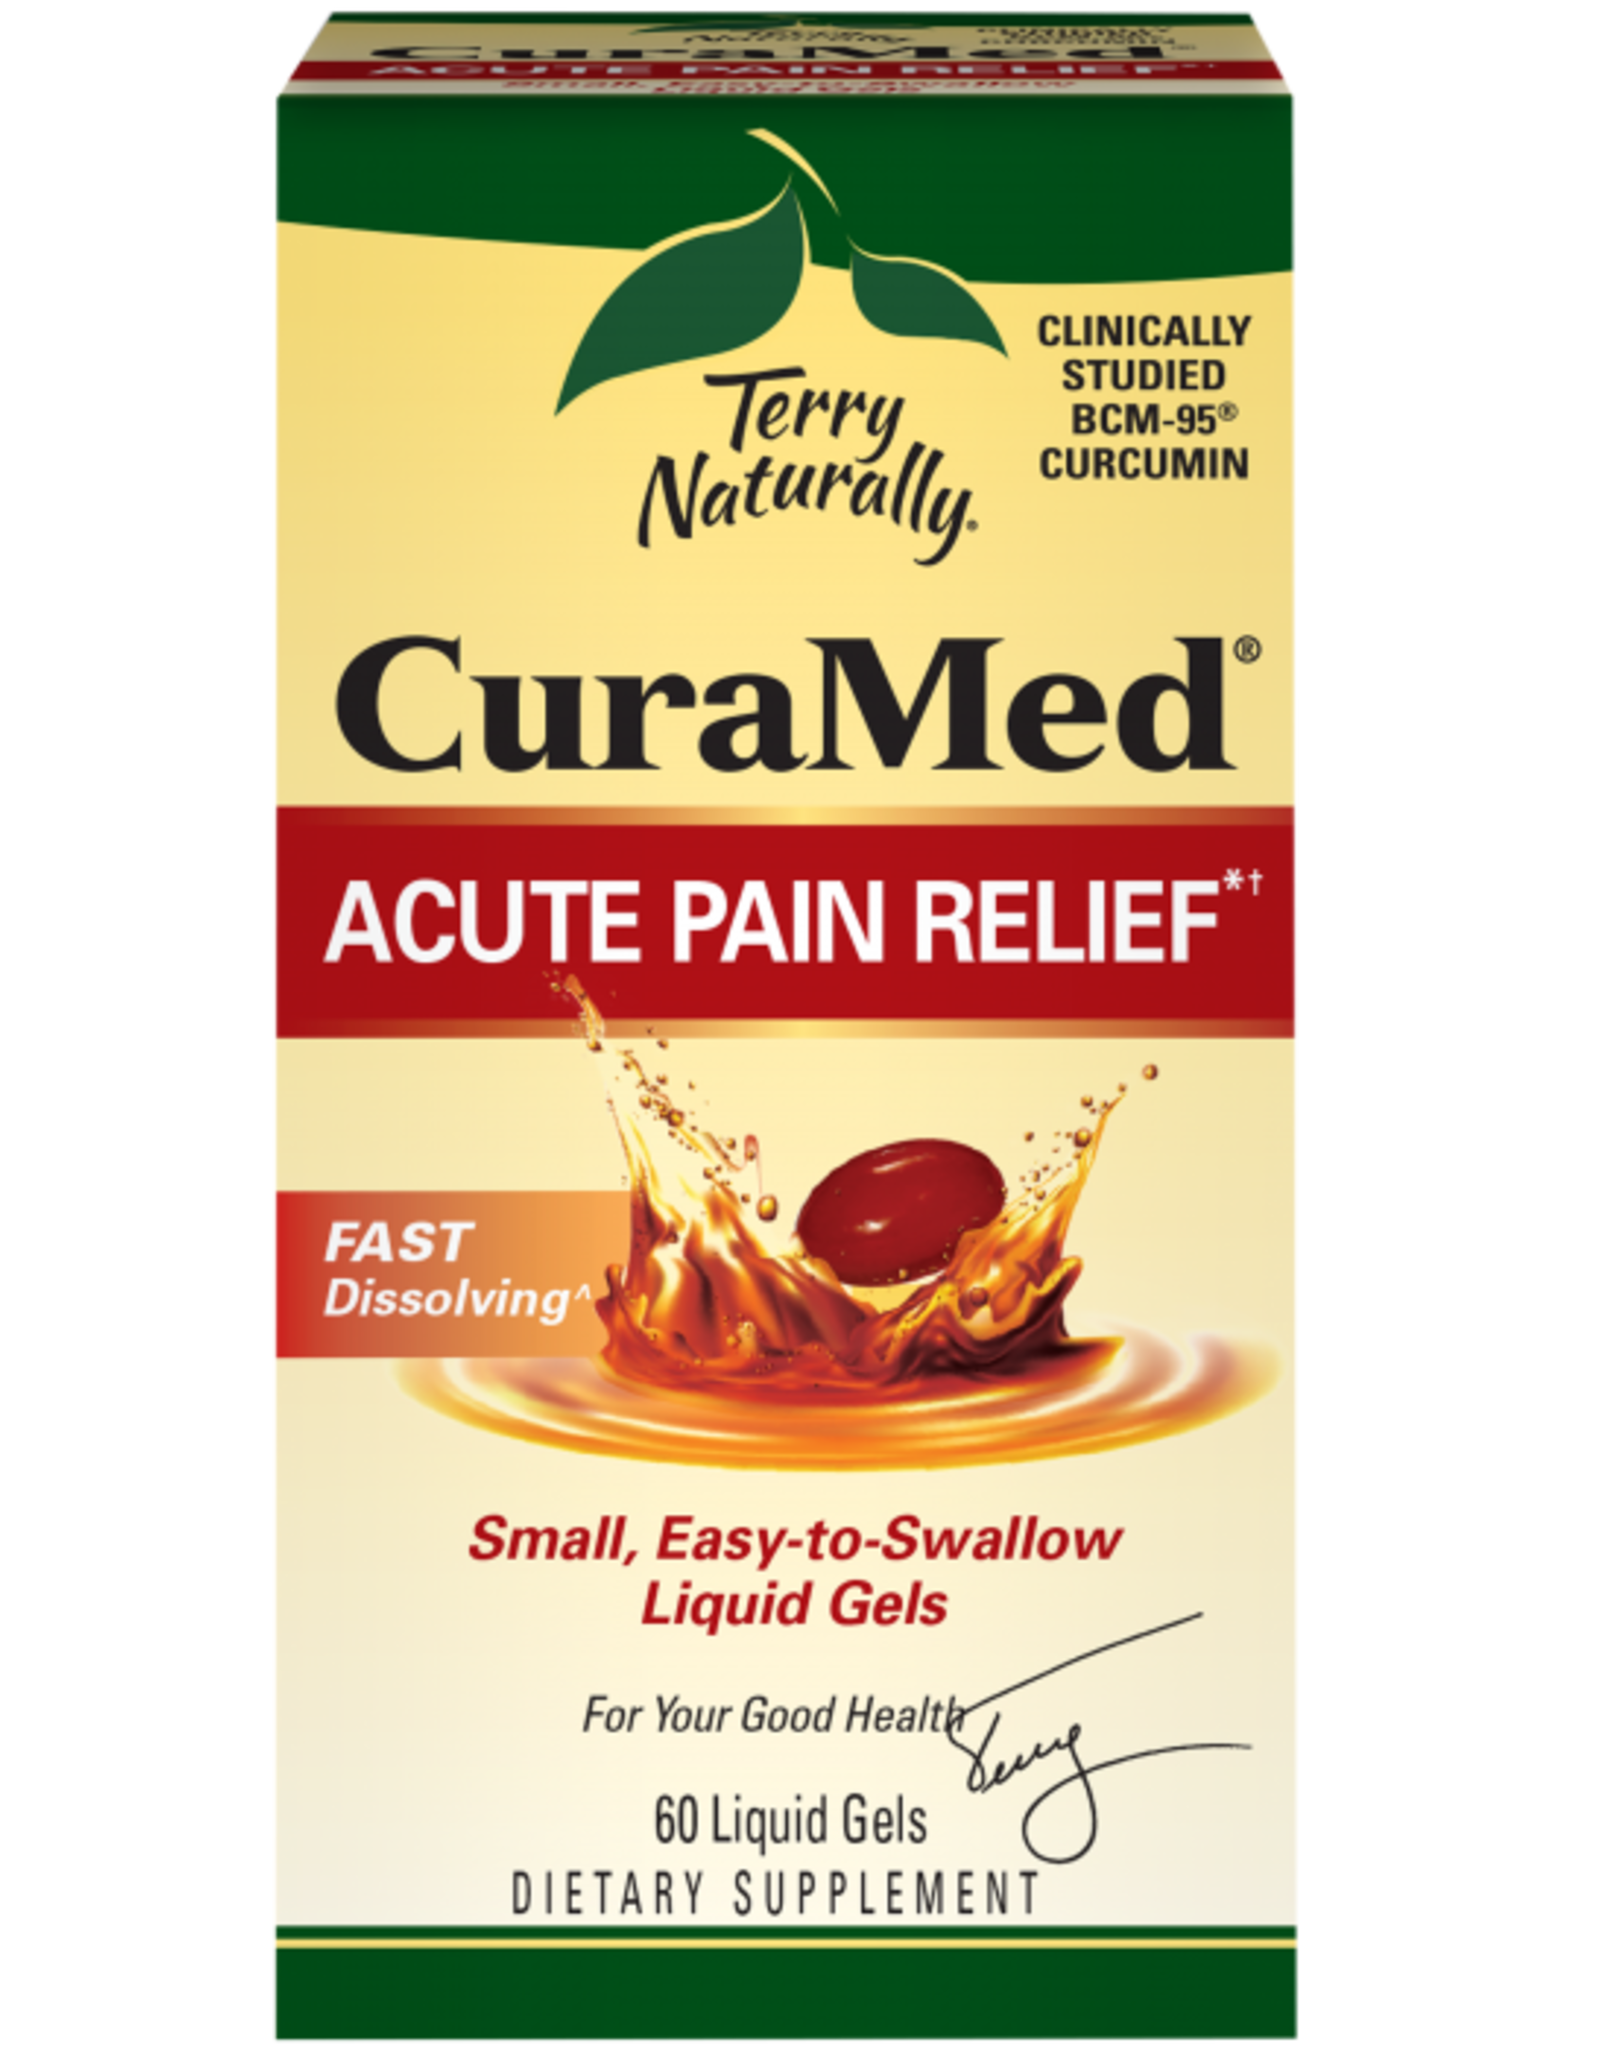 Terry Naturally CuraMed Acute Pain Relief - 60 gels